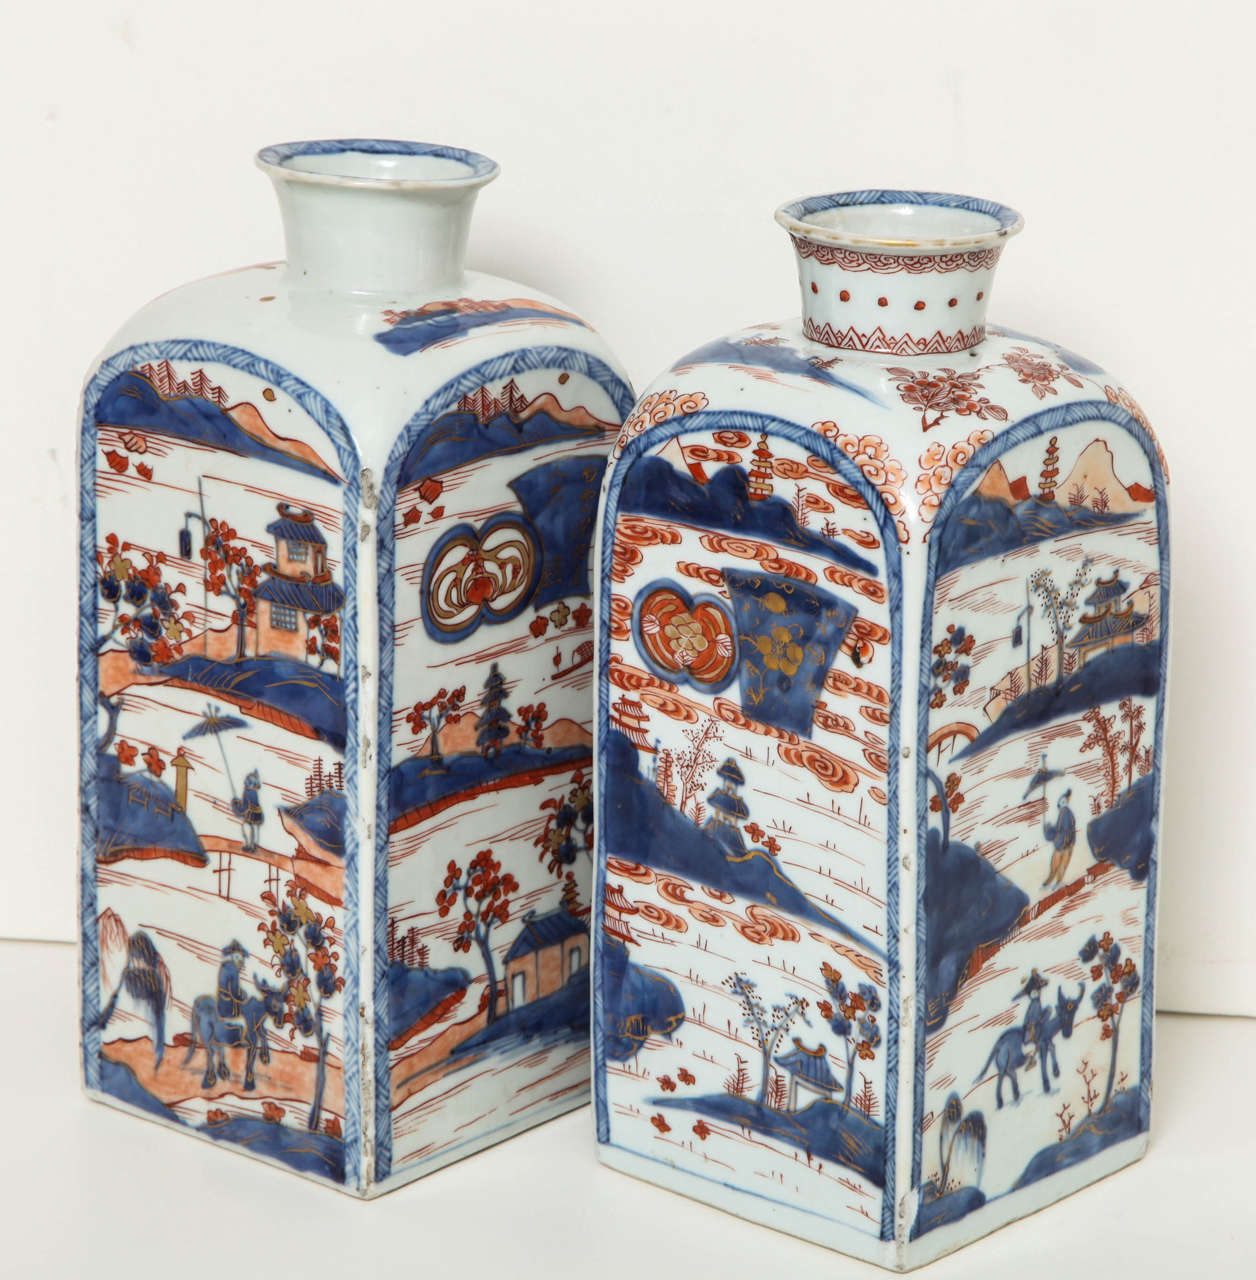 An unusual pair of 18th century Chinese square vases with shaped necks
polychrome decorated with figures in a watery landscape scene